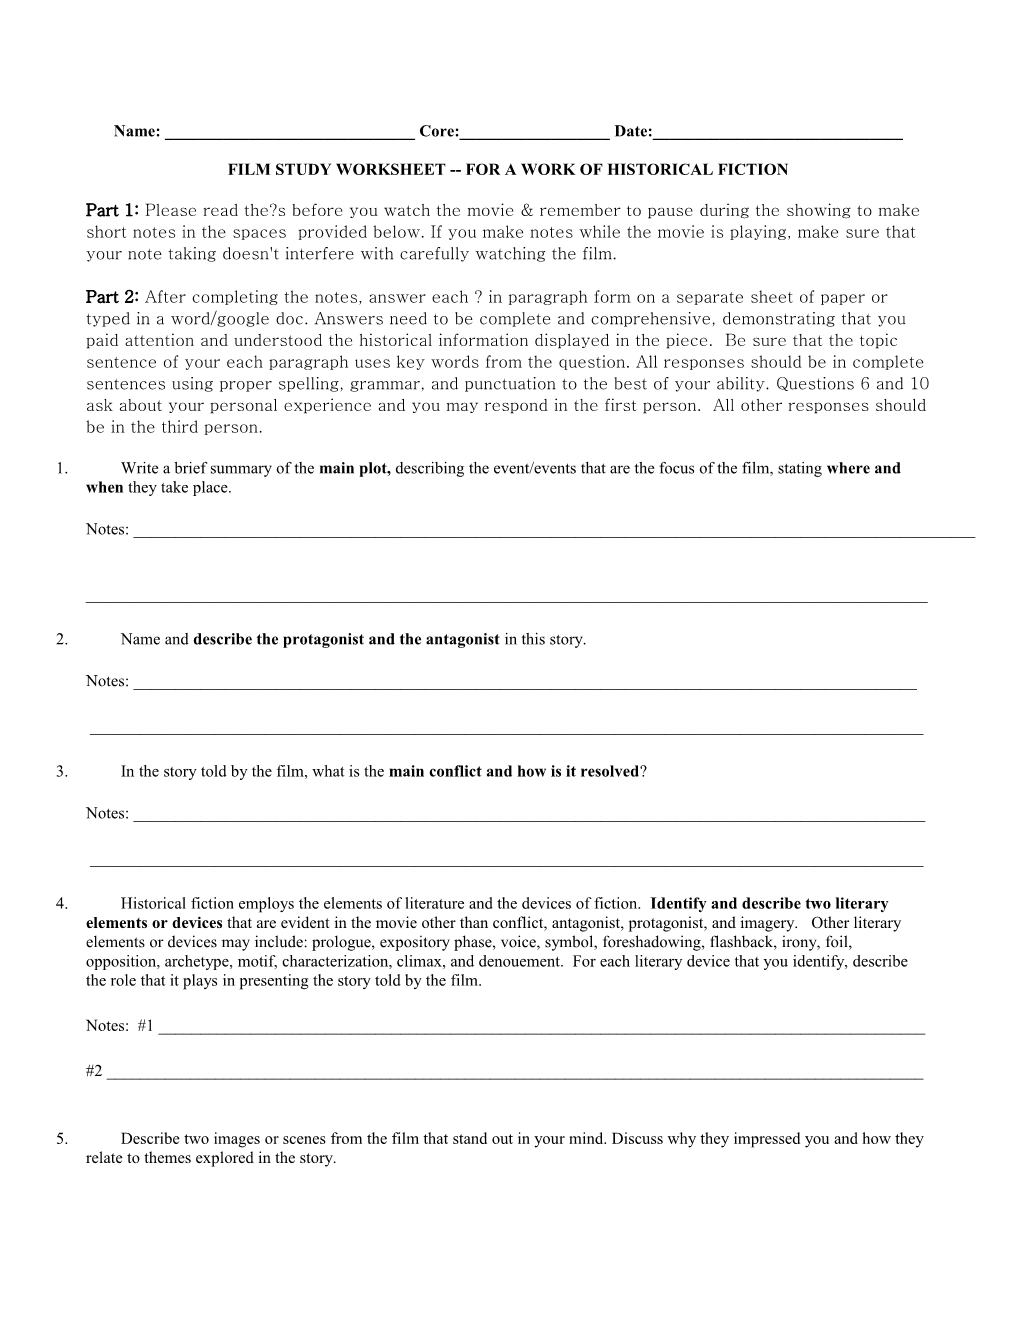 Film Study Worksheet for a Work of Historical Fiction